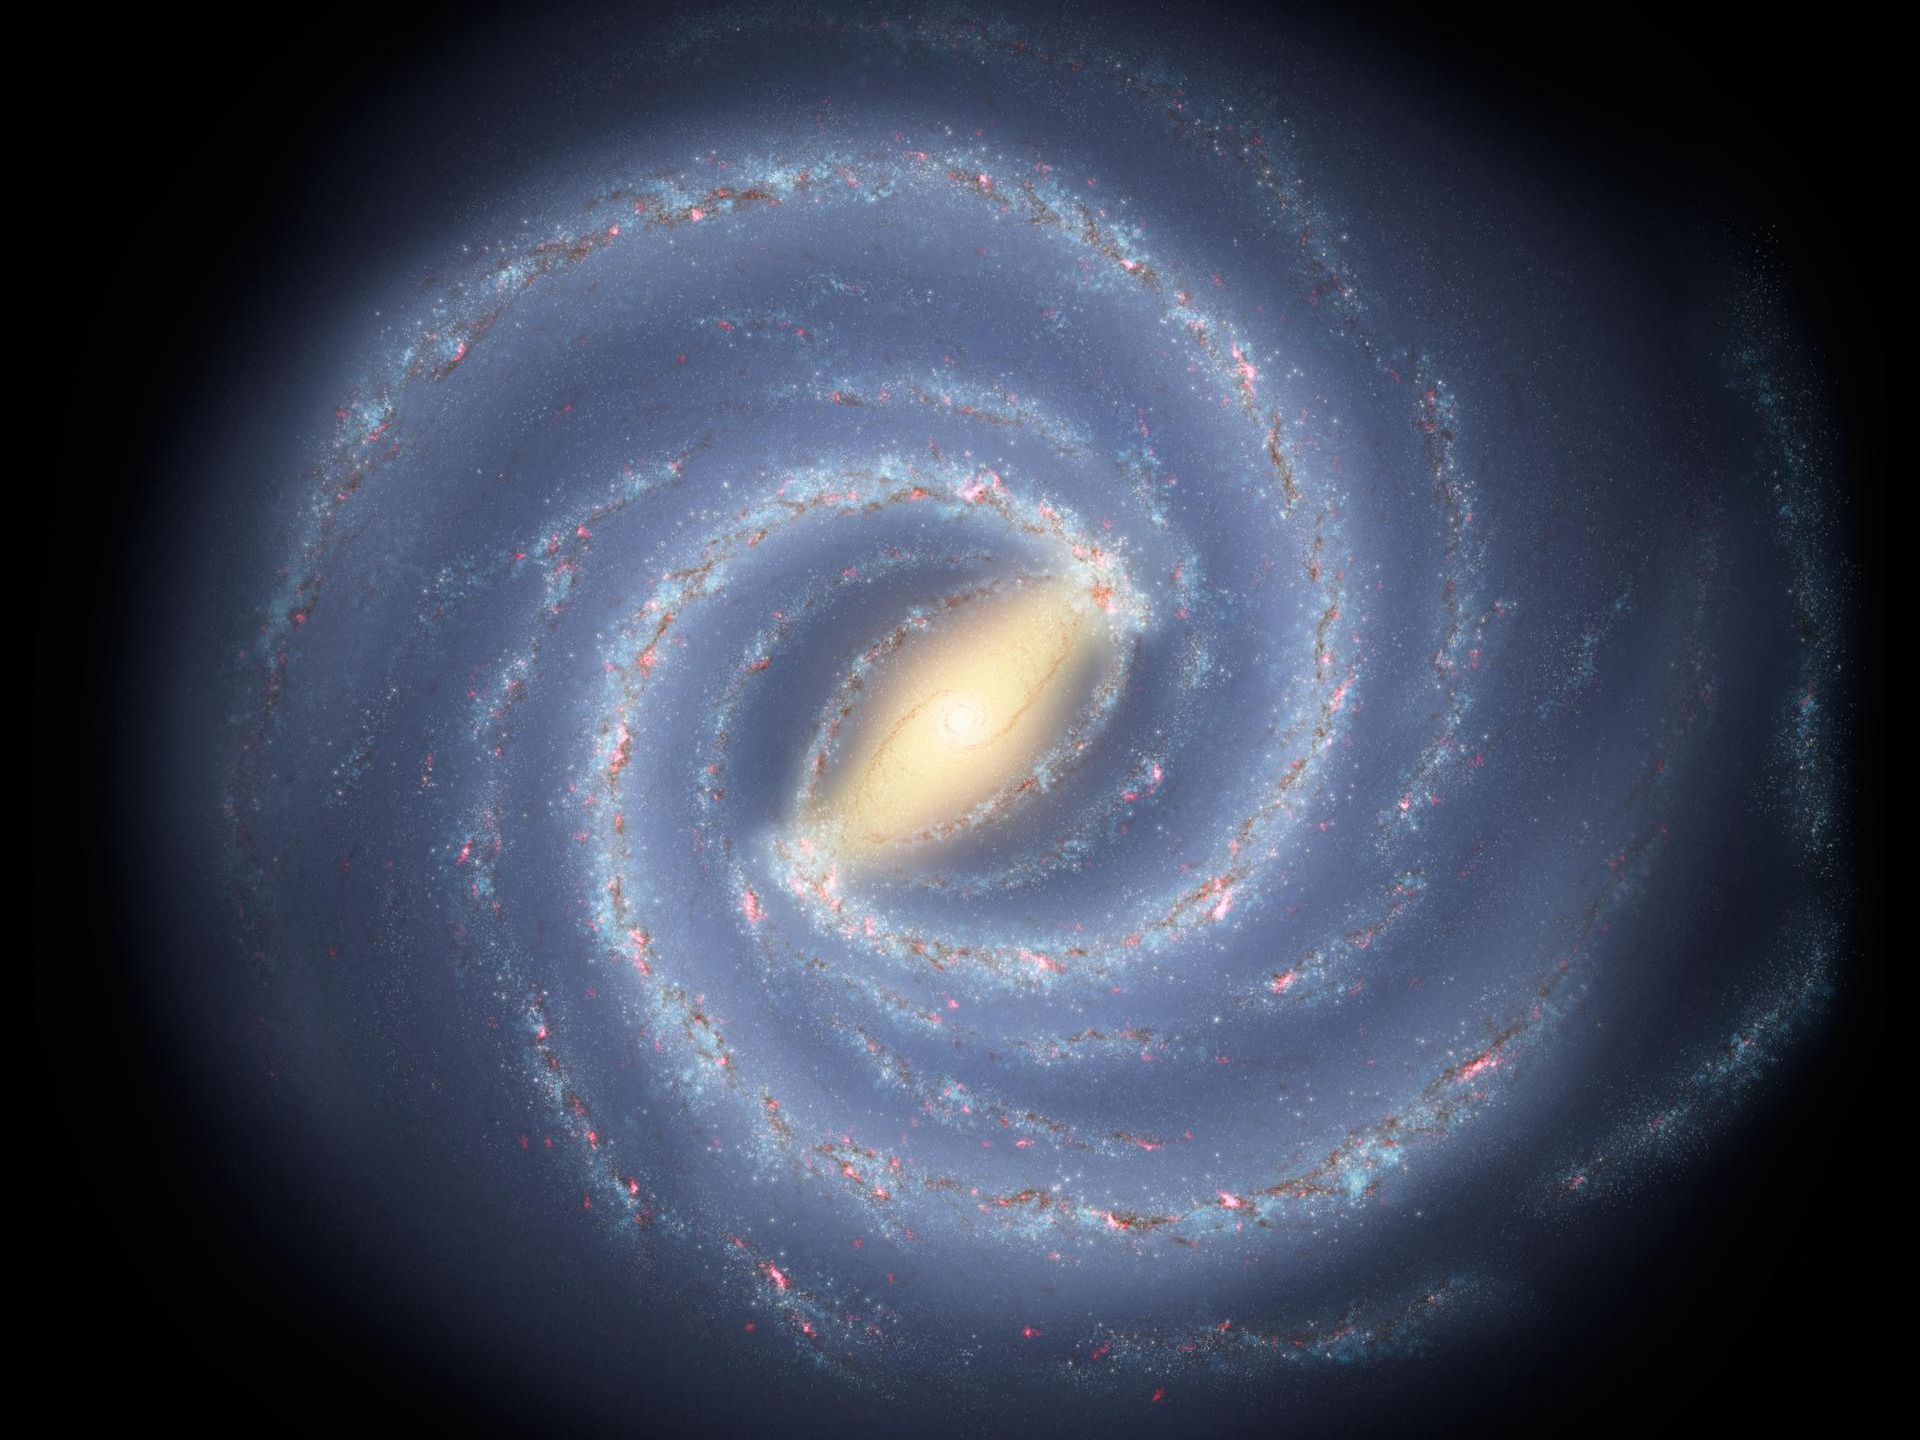 Concept of the Milky Way showing its central bar. (NASA/JPL-Caltech)